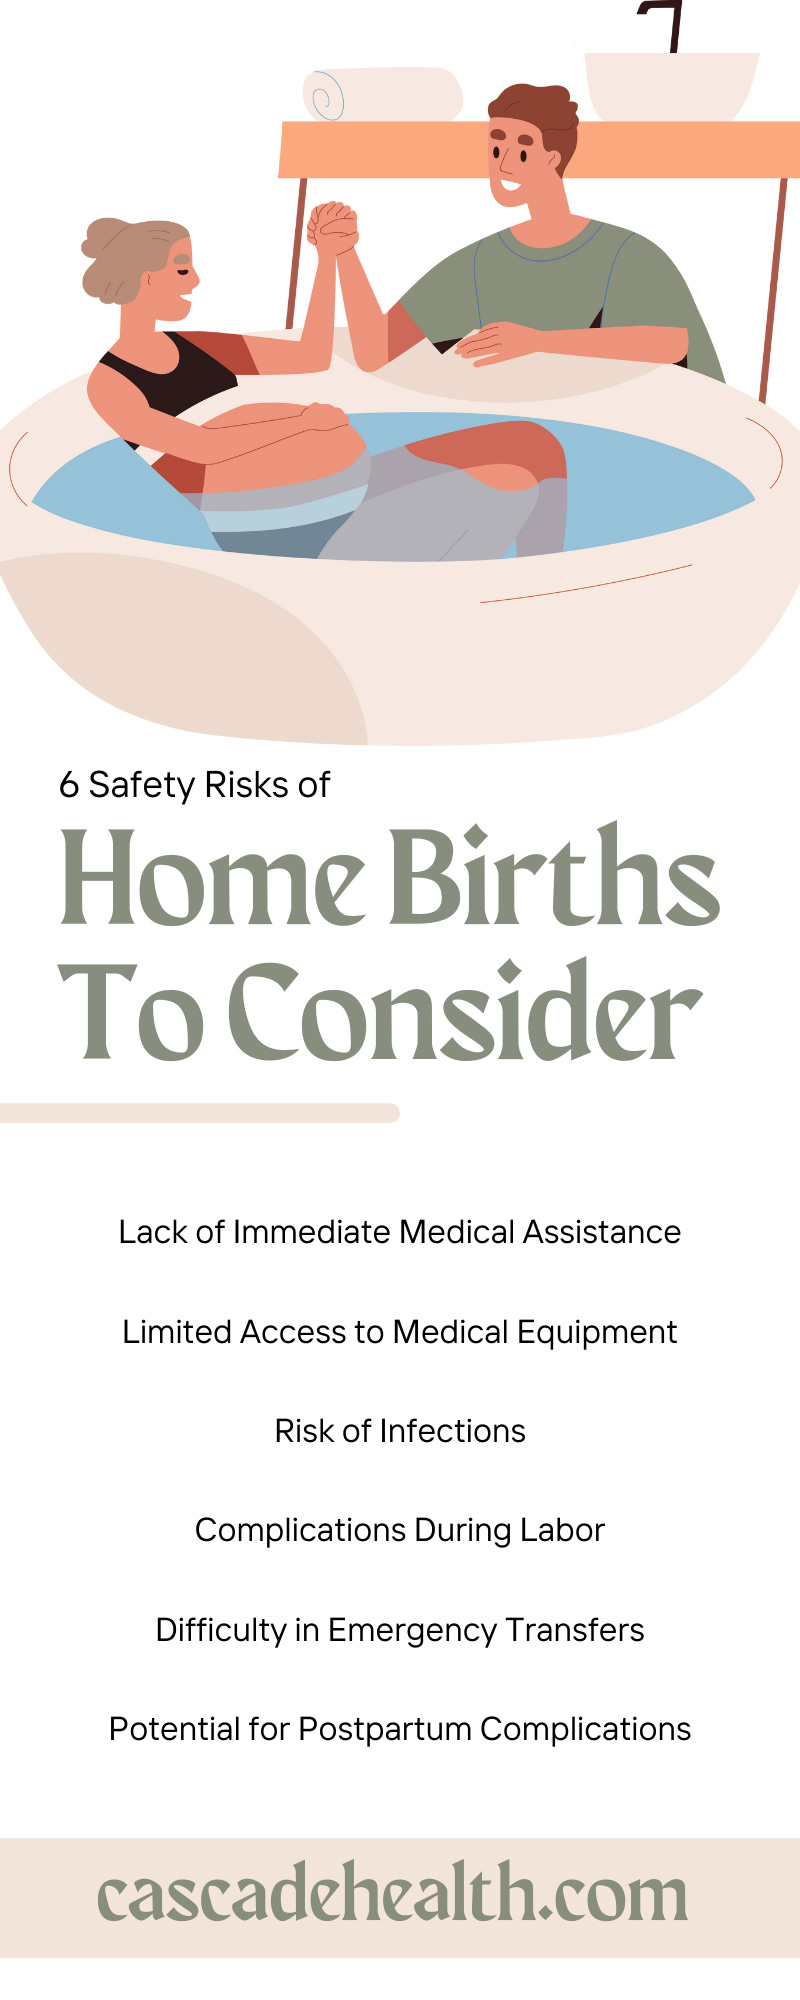 7 Safety Risks of Home Births To Consider